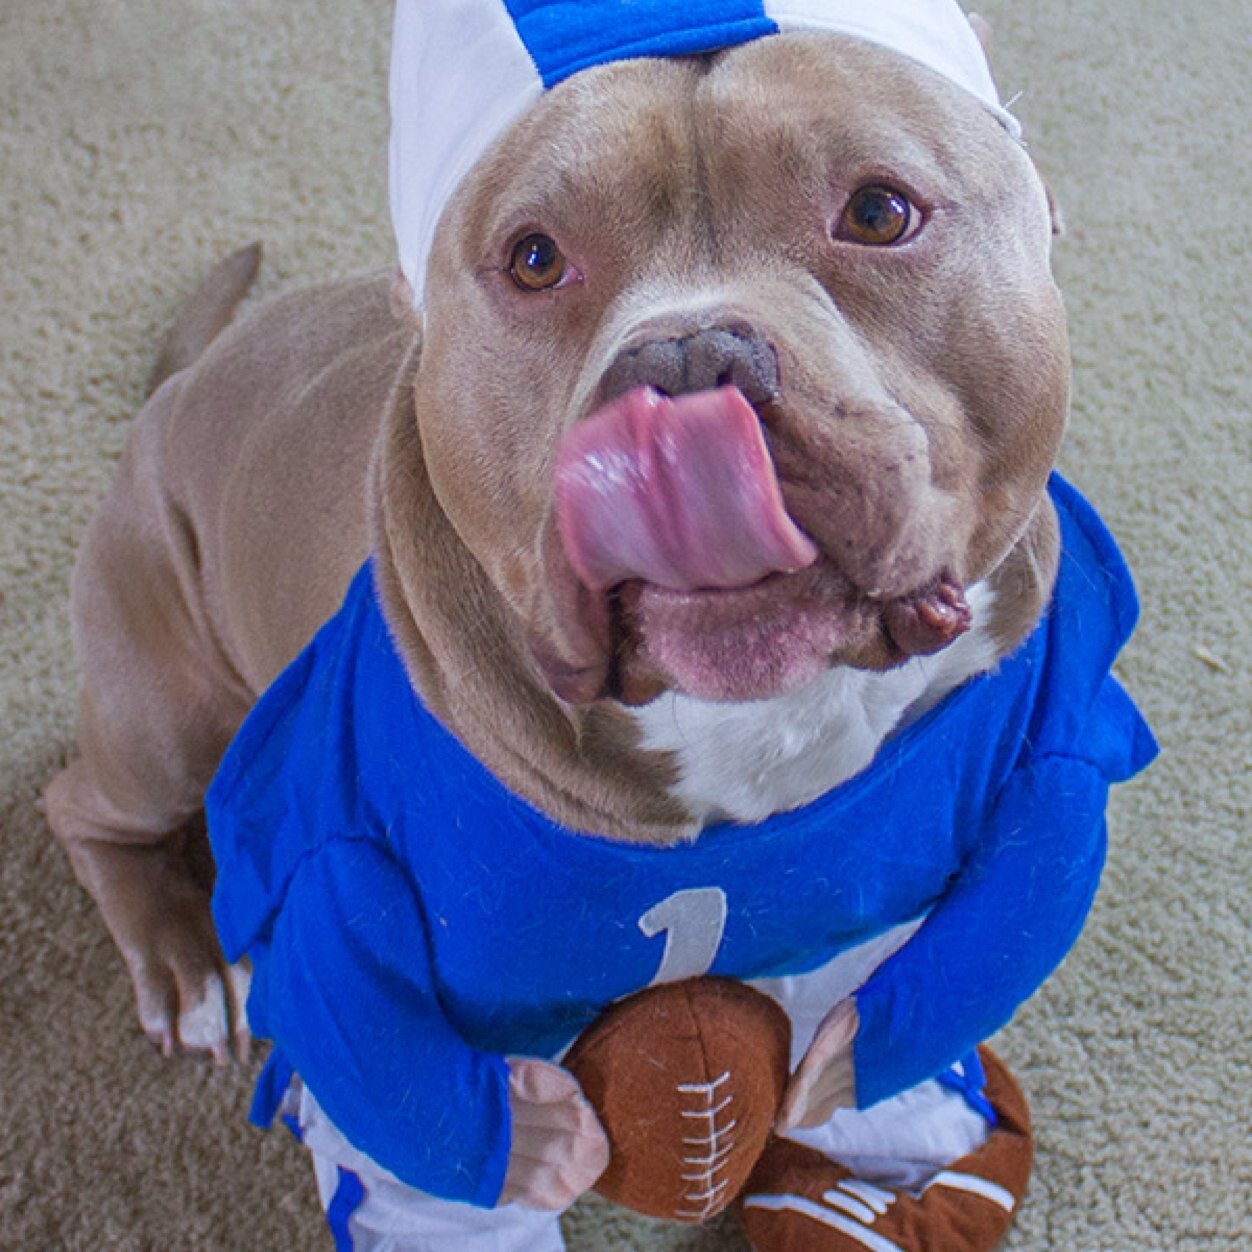 I am an #AmericanBully who loves to snuggle and play! Watch my dog shirt tutorial video: